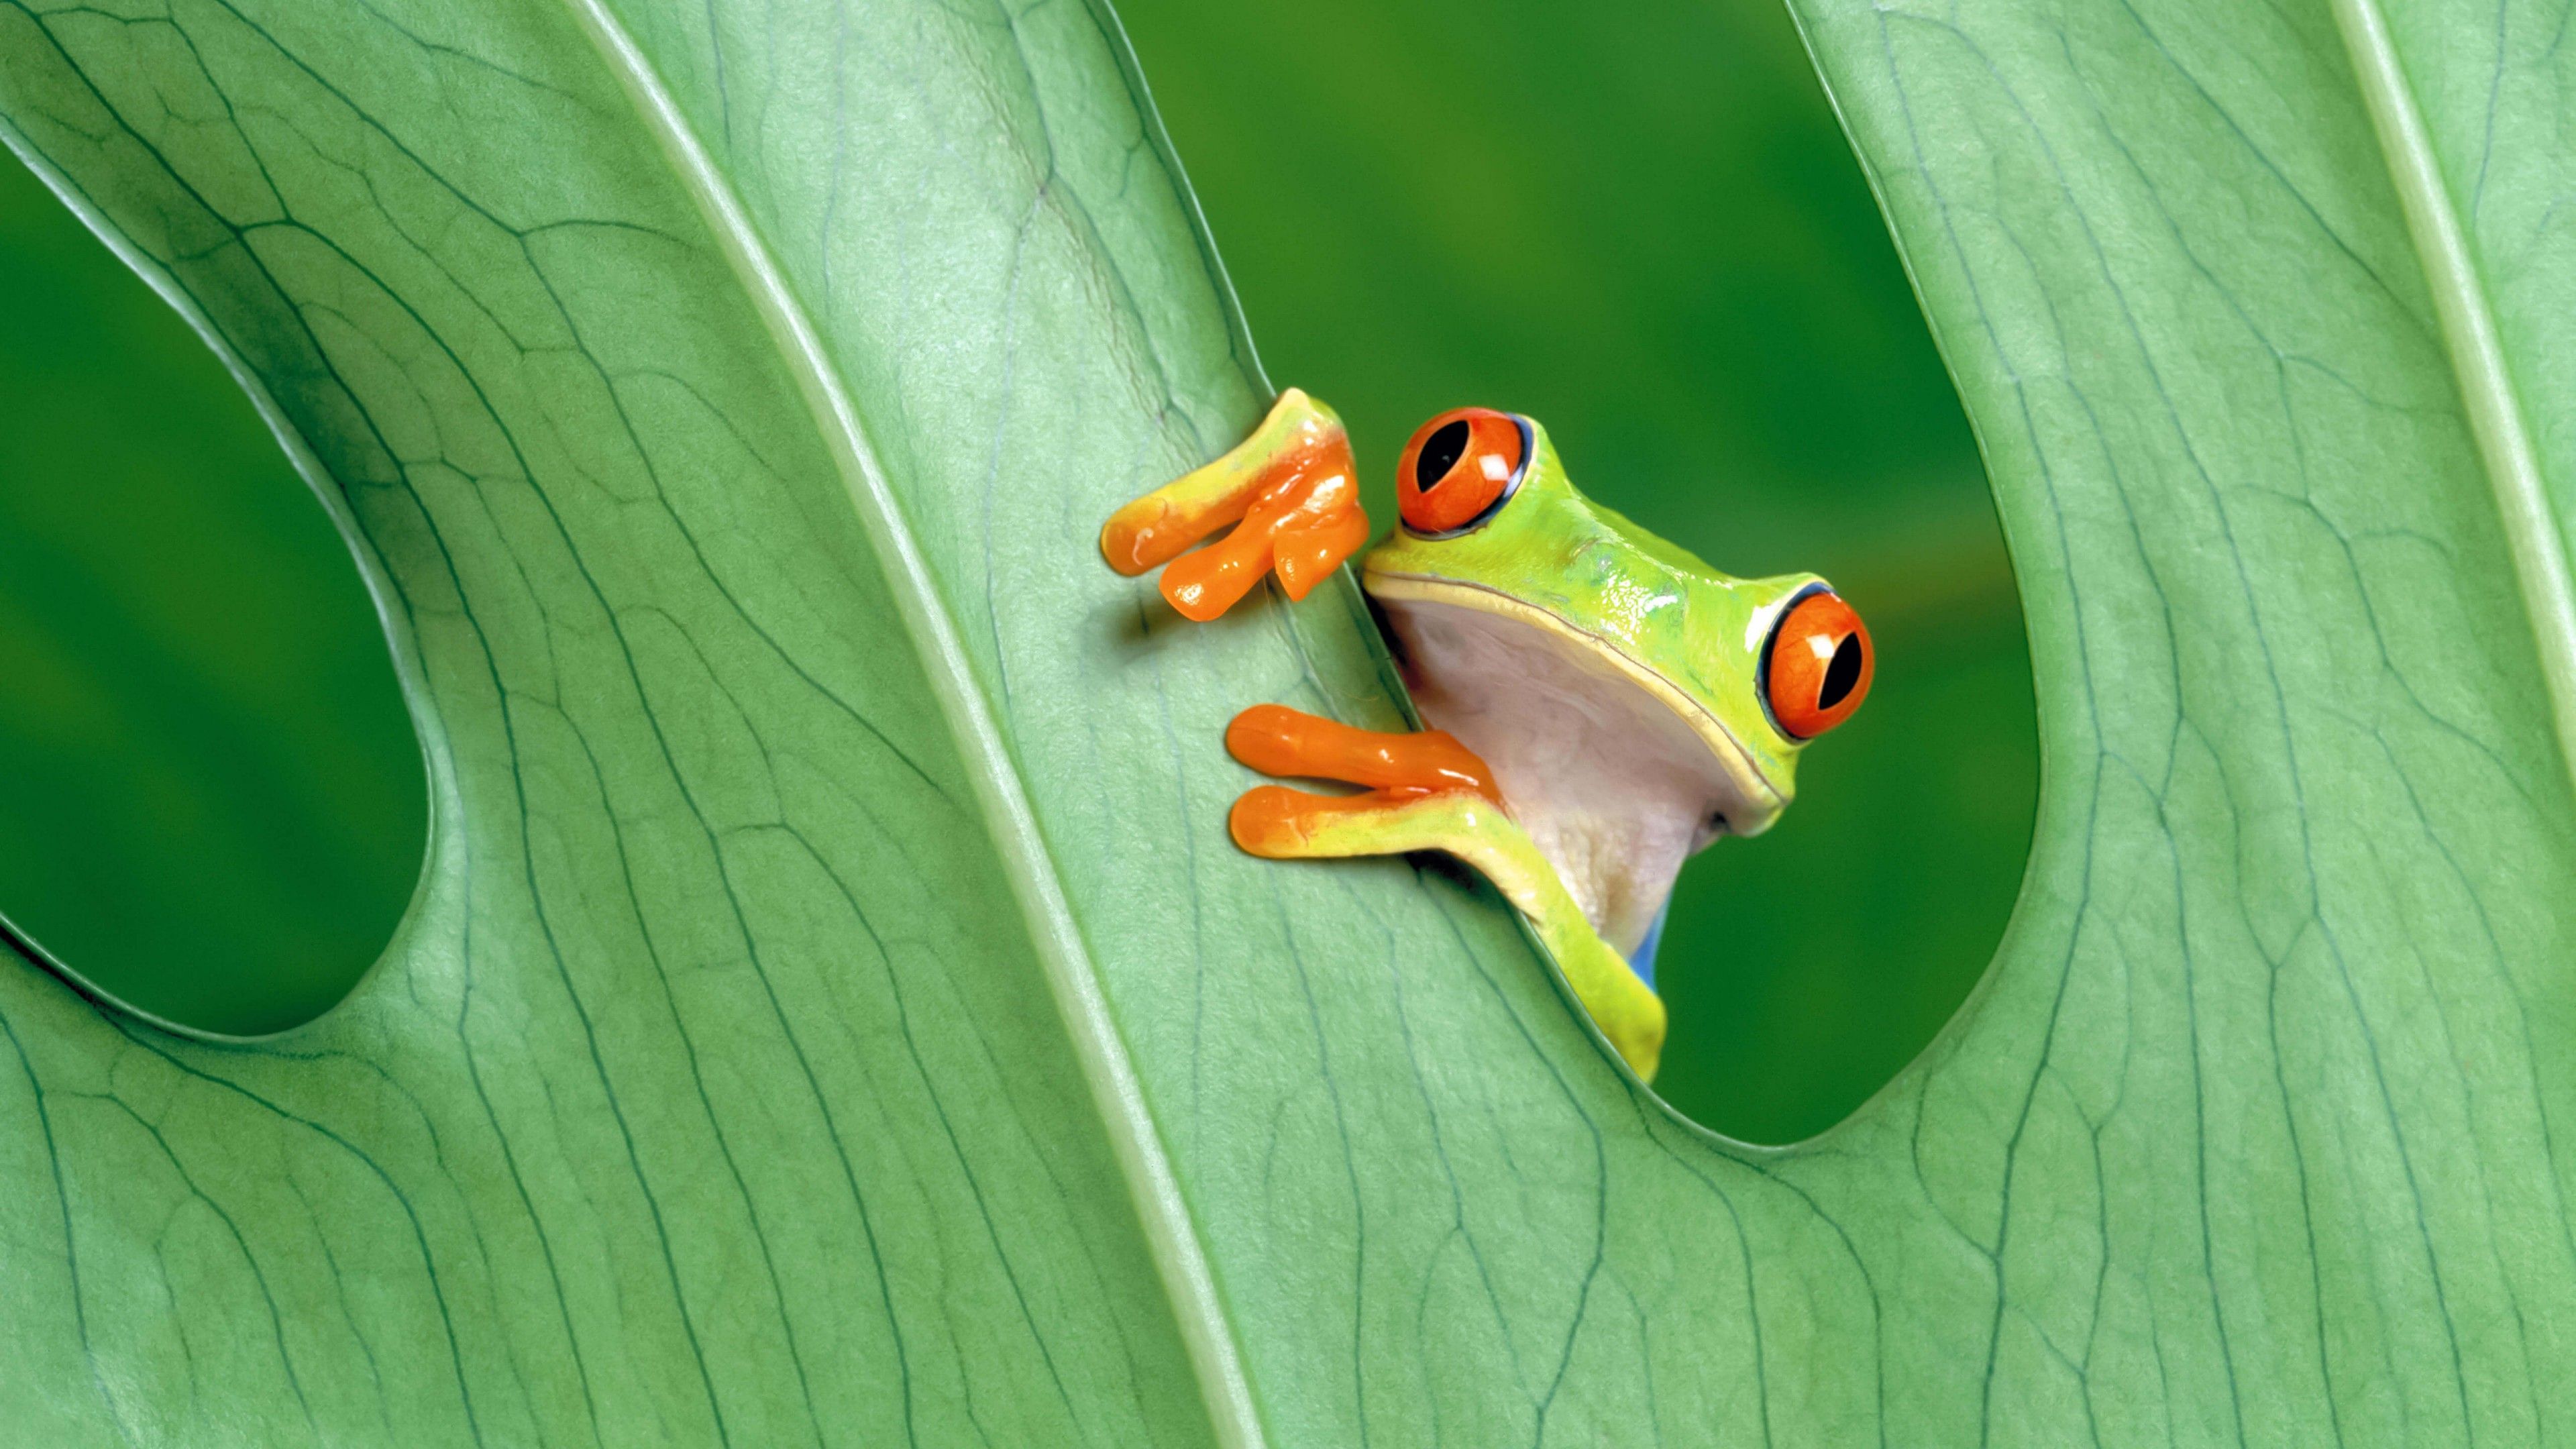 A red-eyed tree frog peeks out from a leaf. - Frog